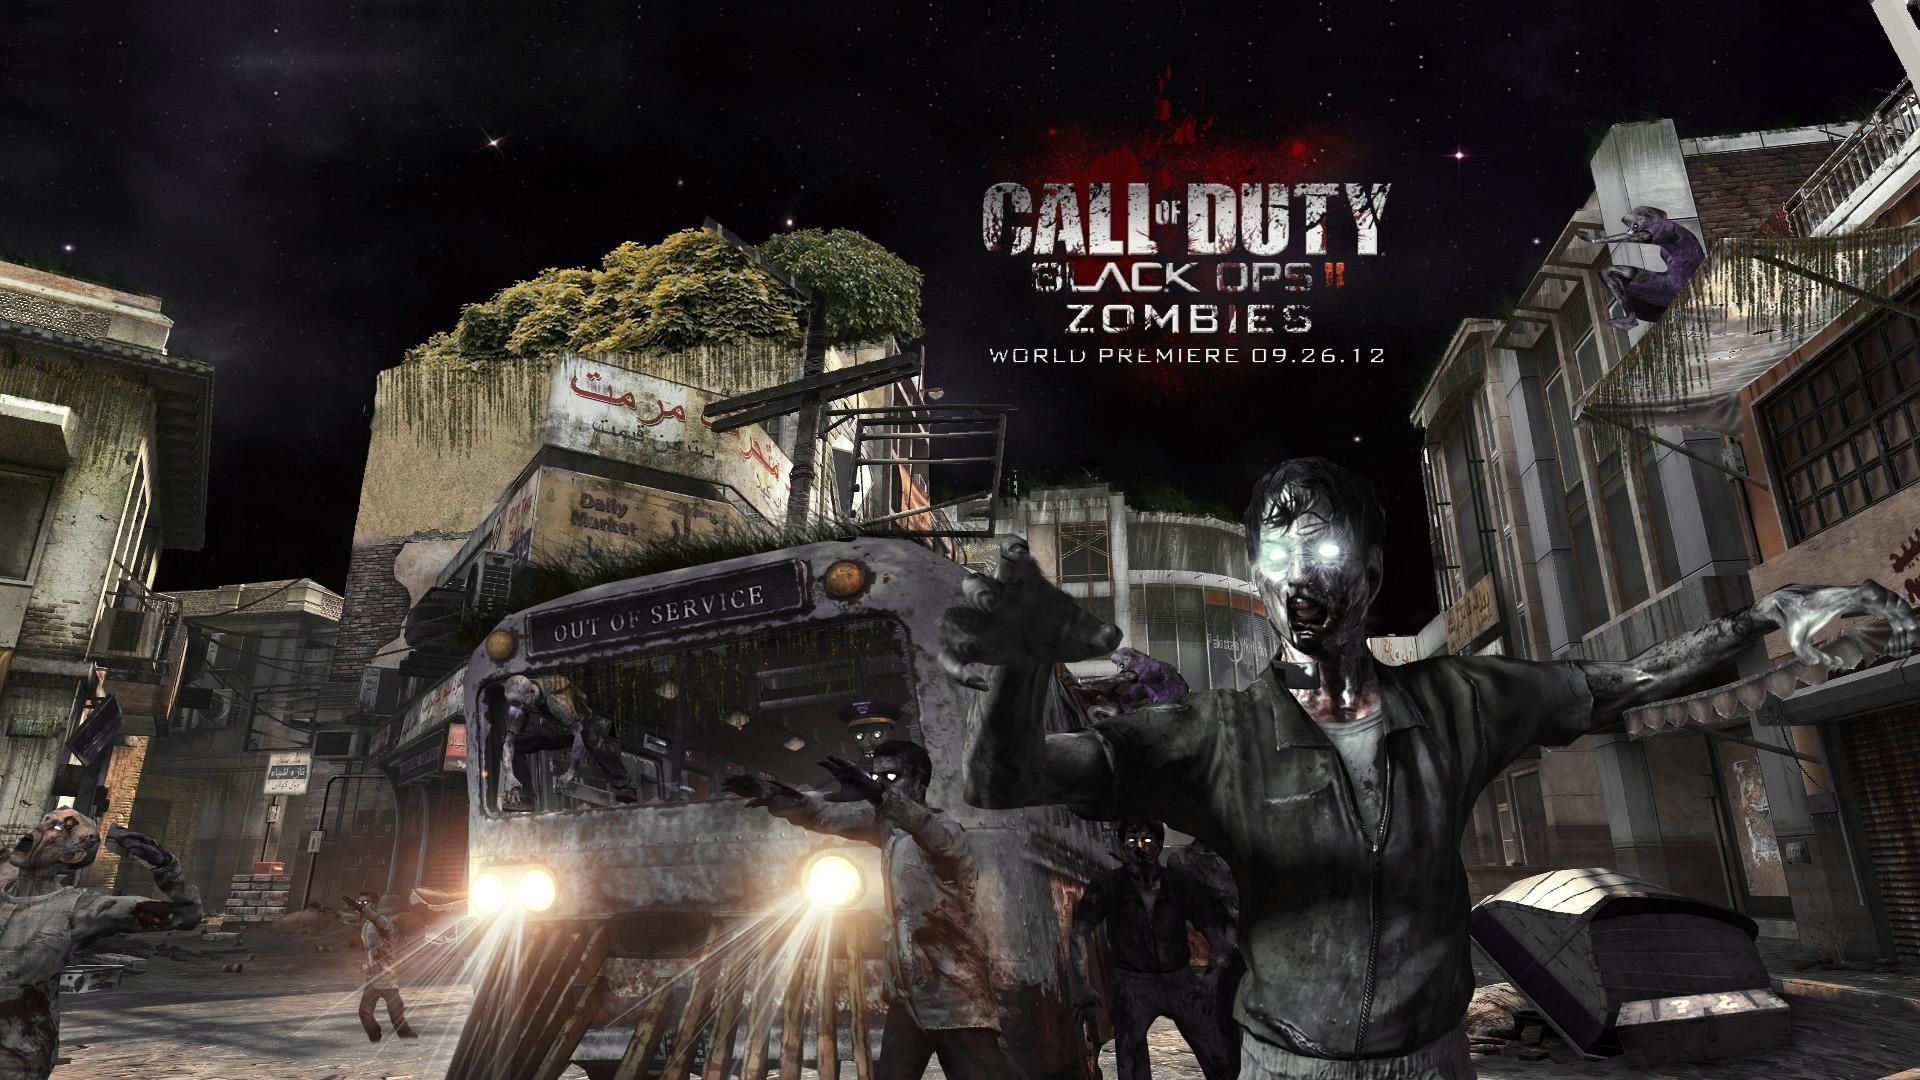 Call Of Duty Black Ops 2 Zombies Wallpaper Hd HD Wallpaper and other